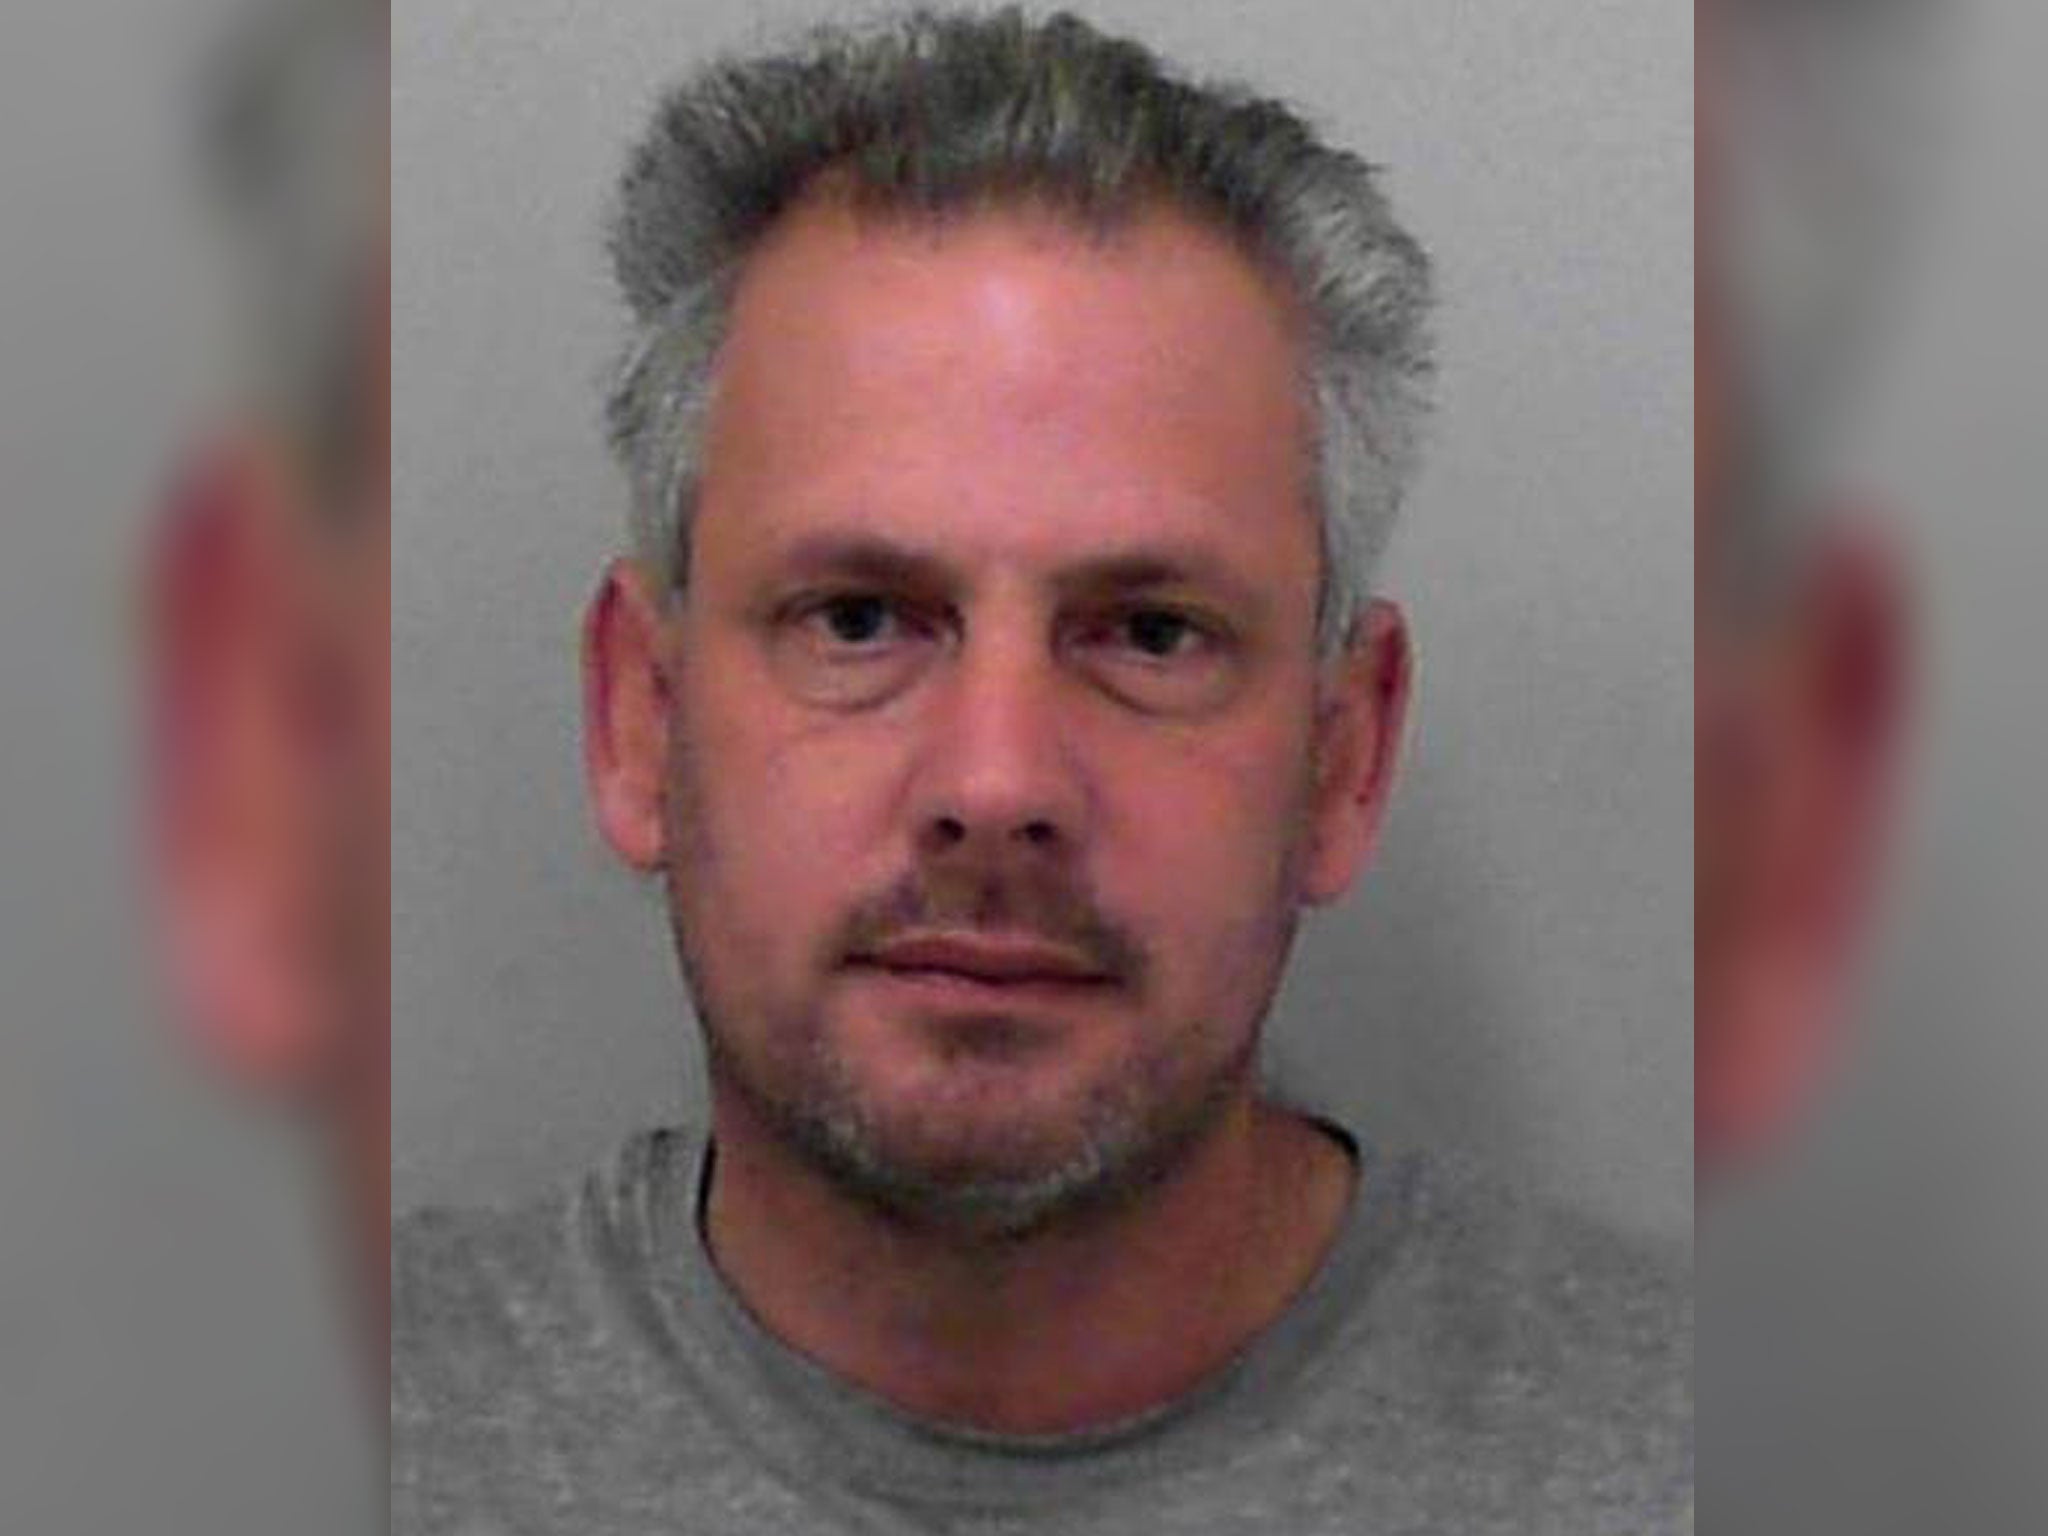 Forty-year-old Joseph Isaacs was found guilty of attempted murder